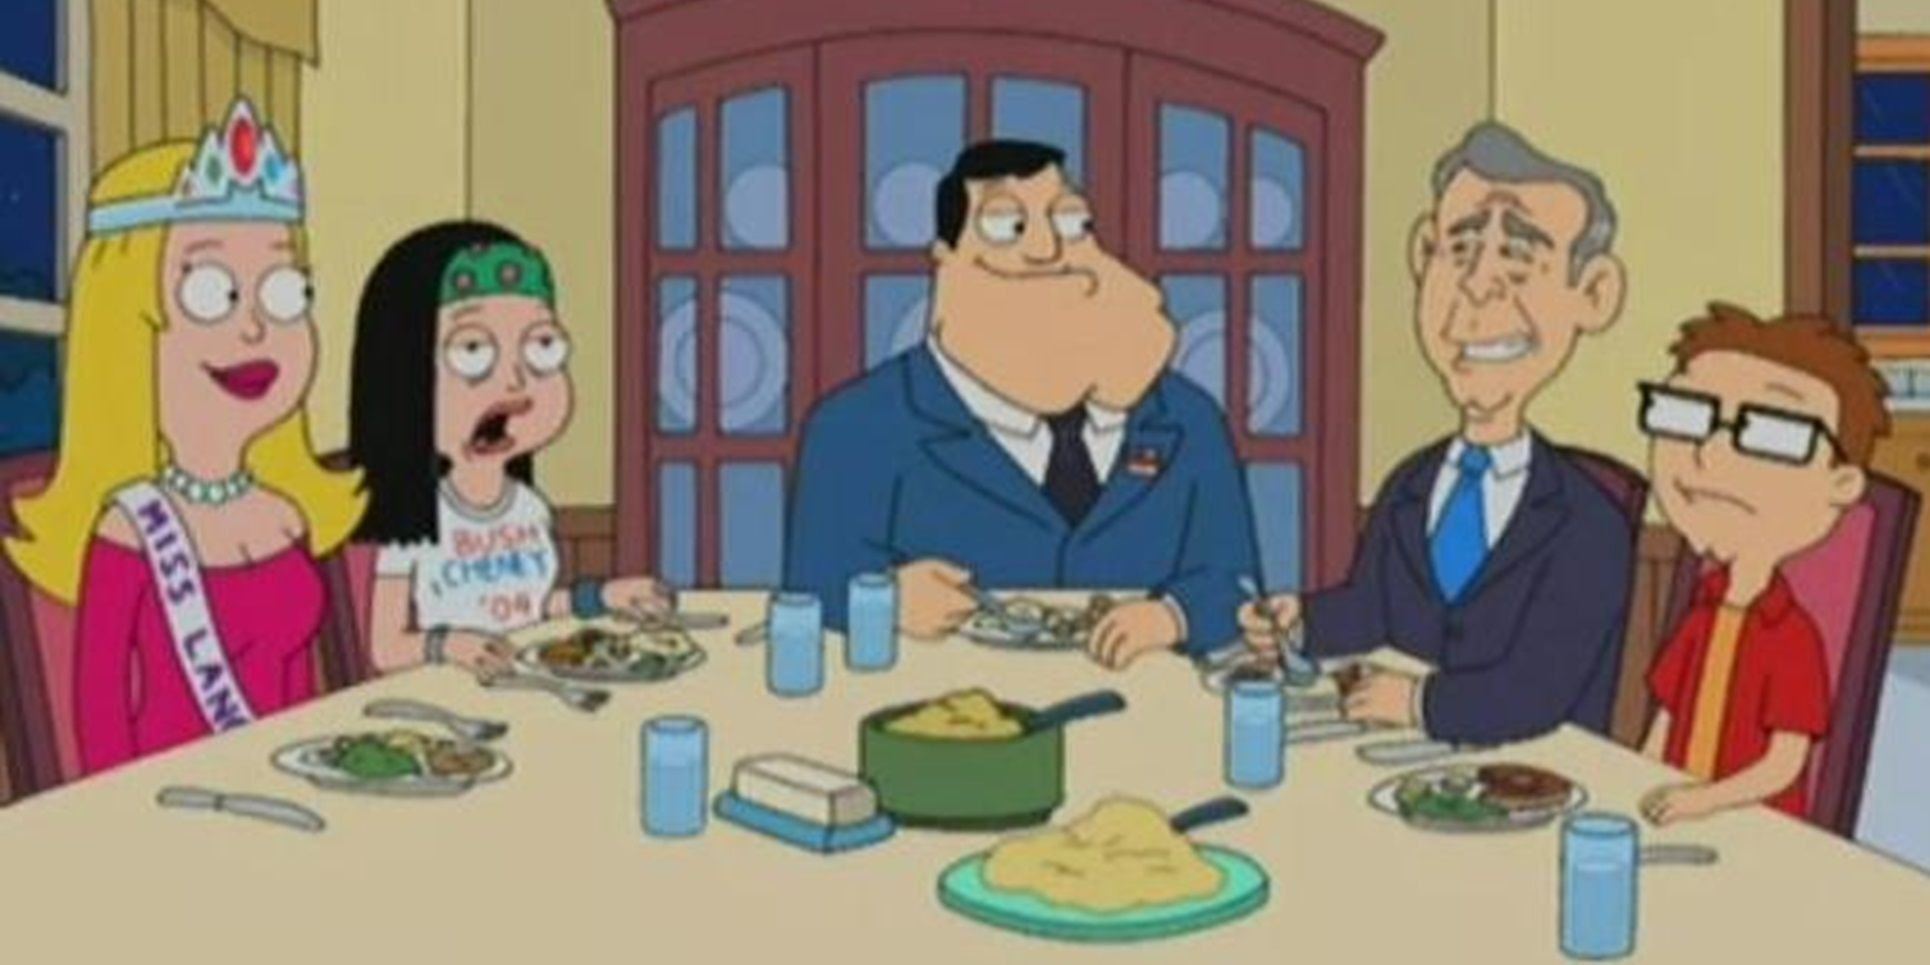 George W Bush eats dinner with the Smiths in American Dad